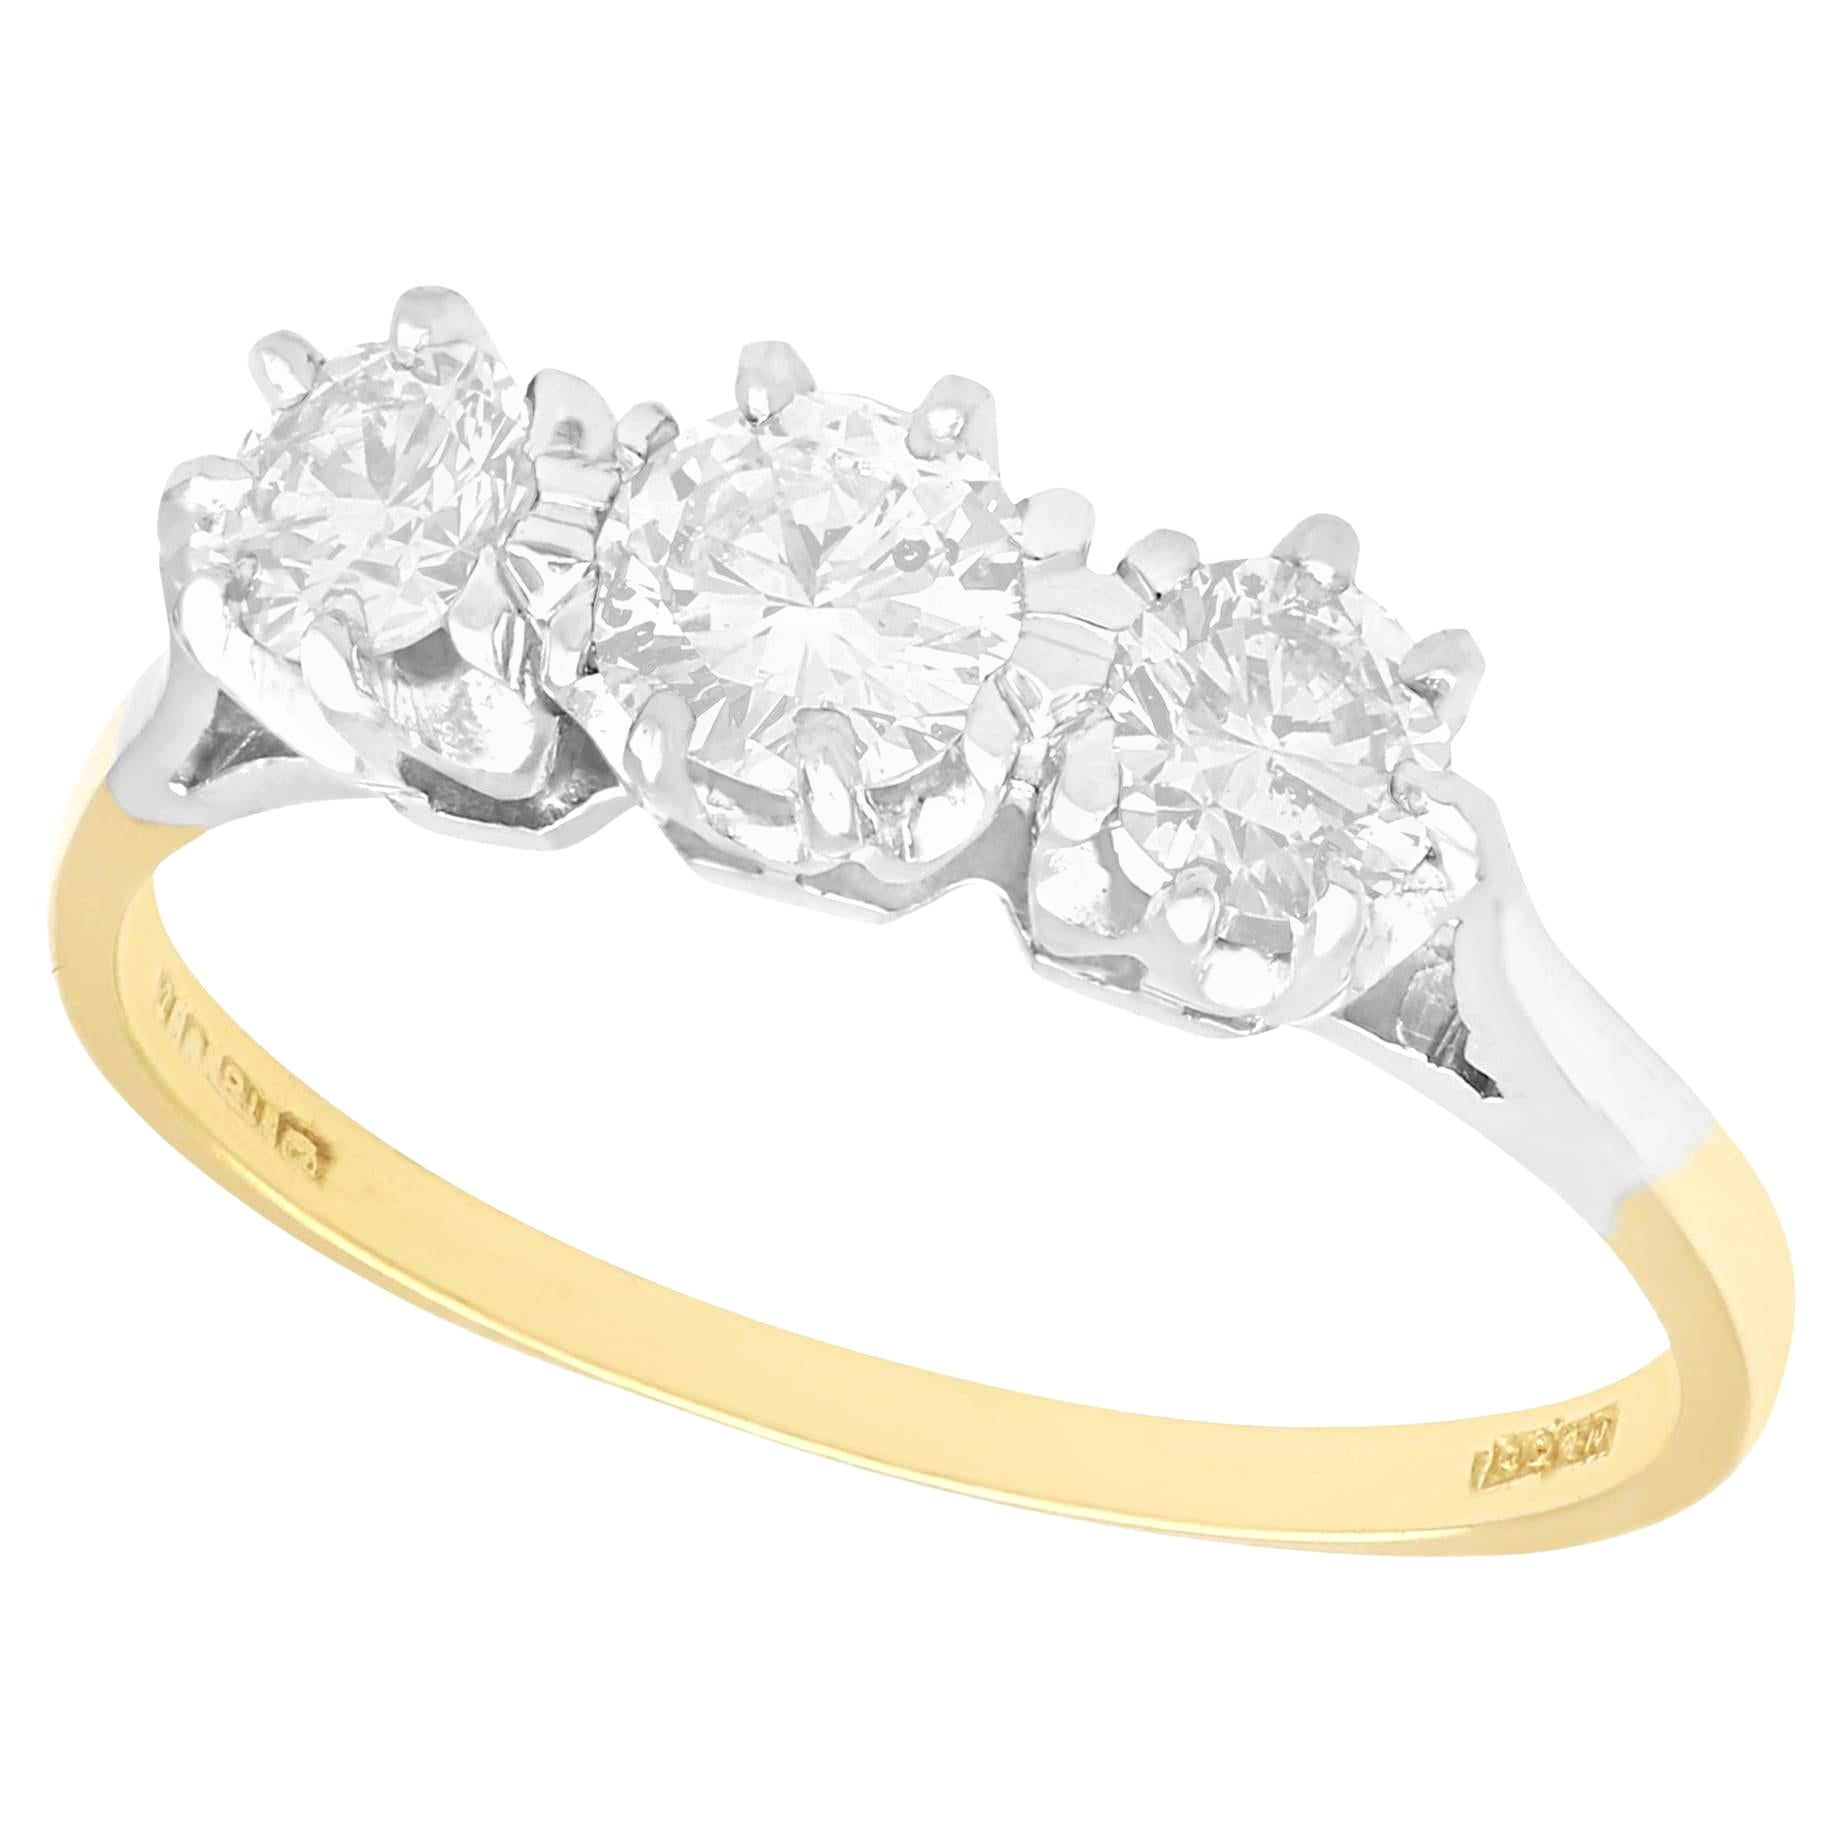 1.01 Carat Diamond and Yellow Gold Trilogy Engagement Ring